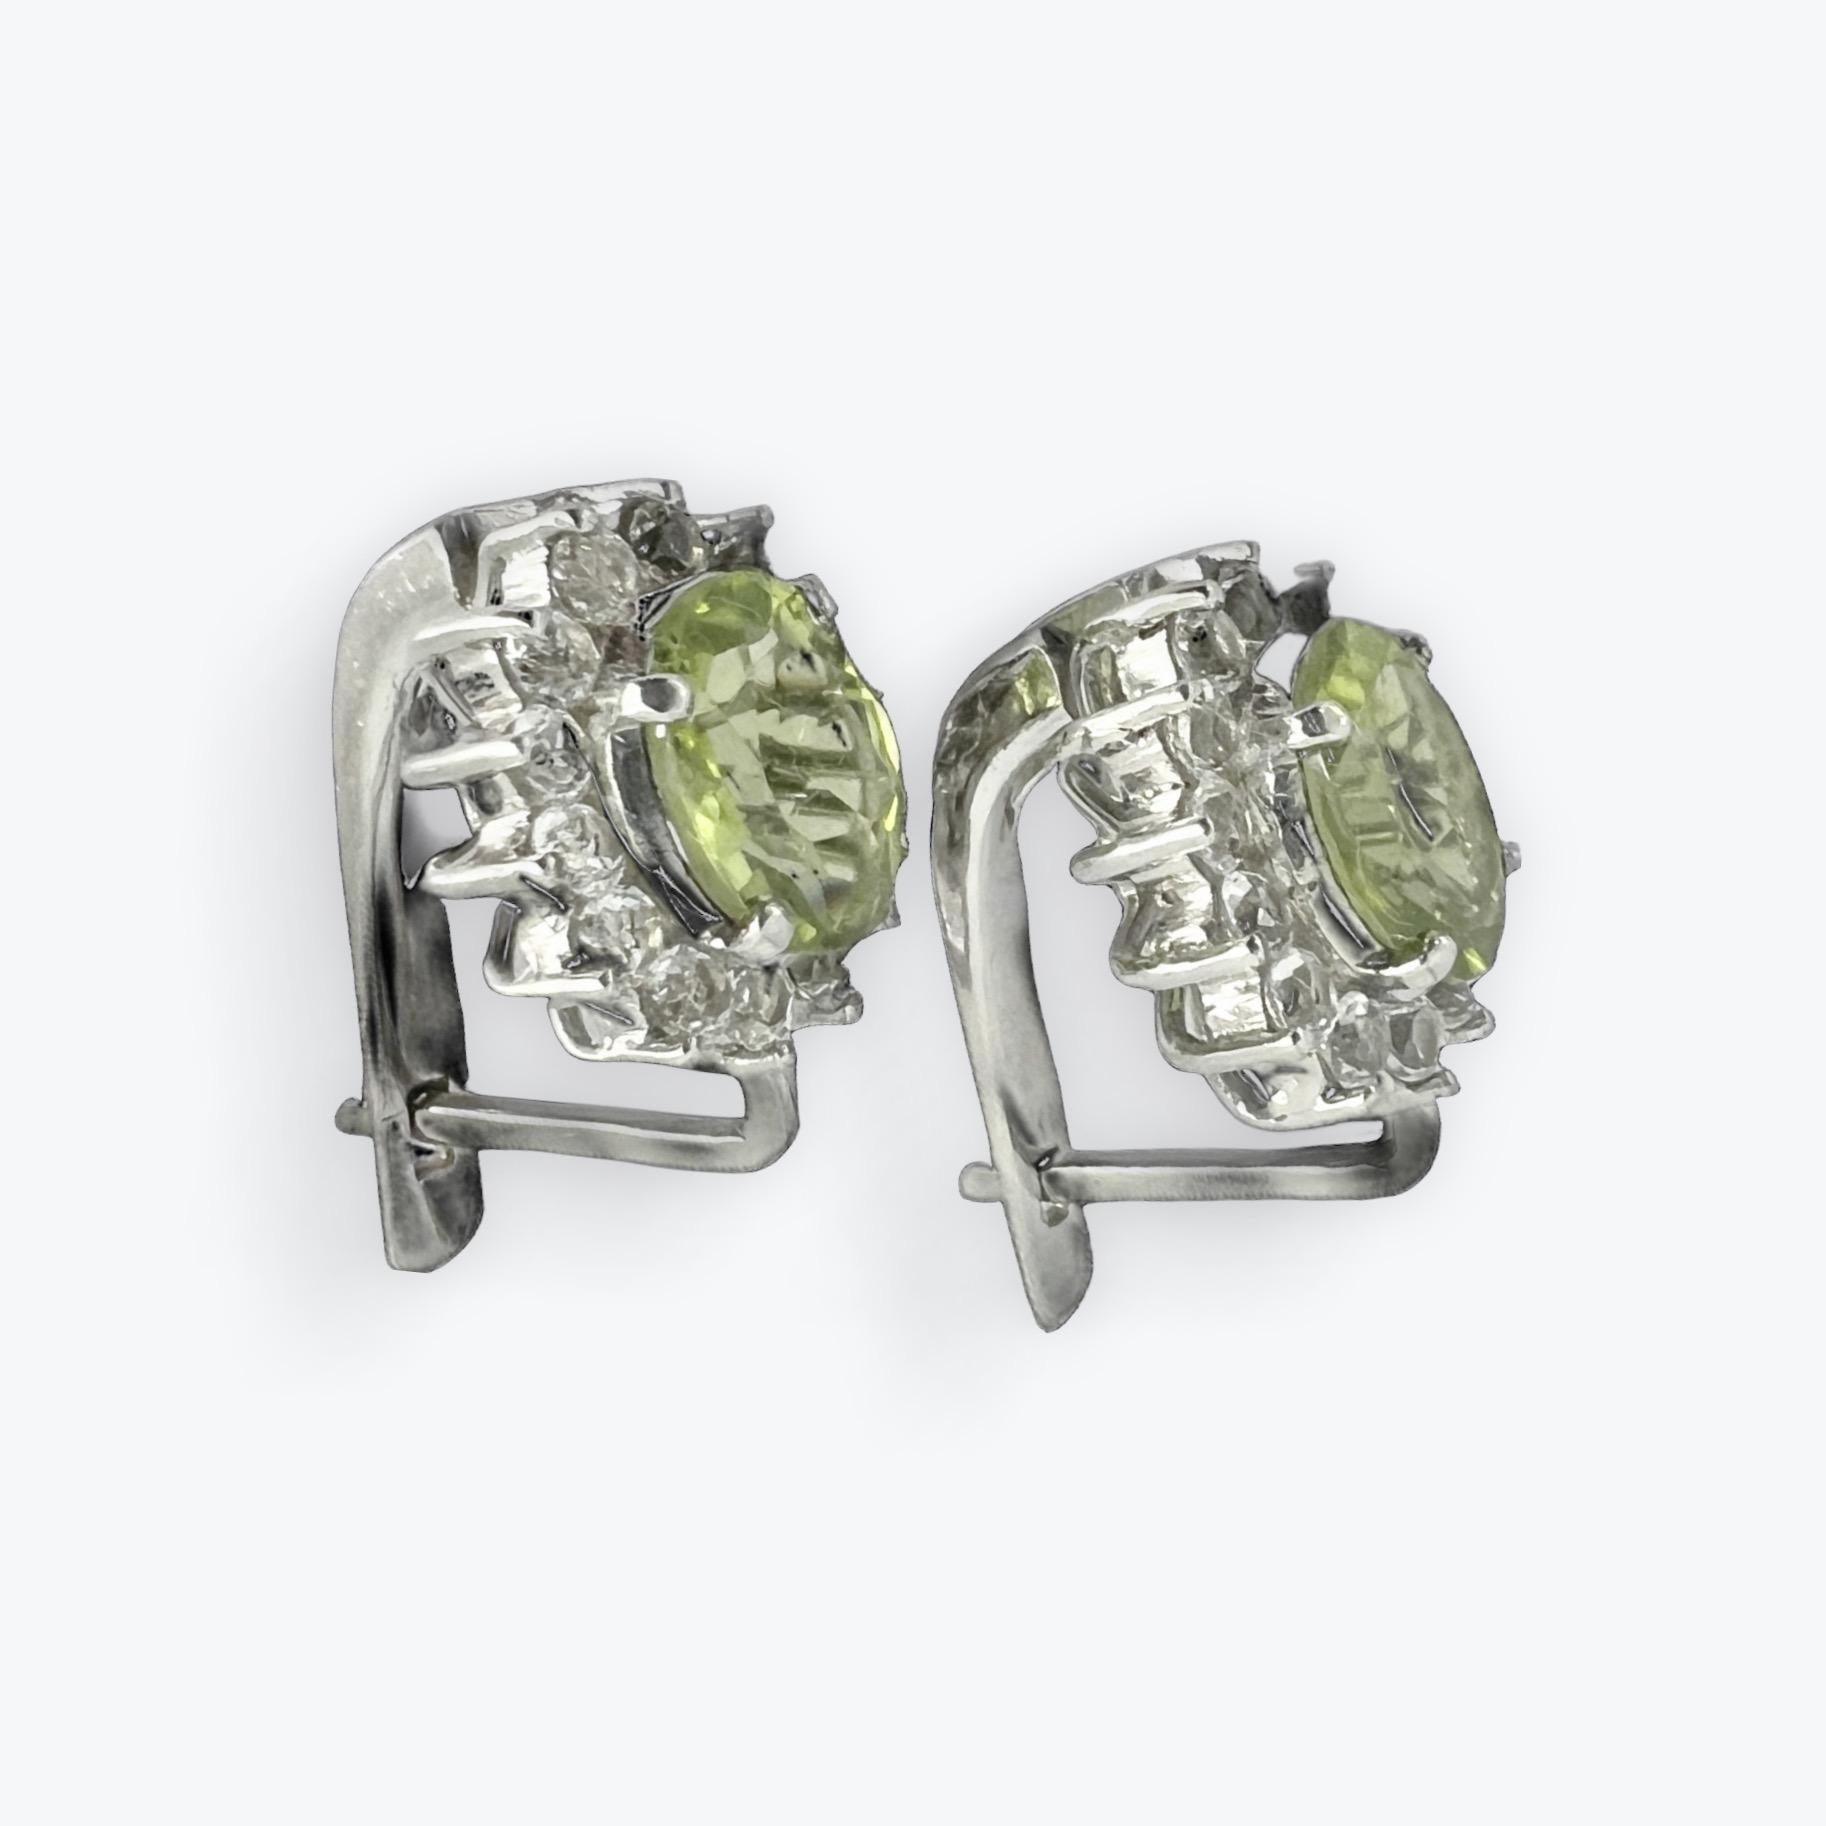 Add a touch of vibrant elegance to your ensemble with our stunning 1ct each Oval Peridot Earrings. Each earring features a mesmerizing oval mint green peridot gemstone, surrounded by sparkling white natural zircon accents, creating a radiant and